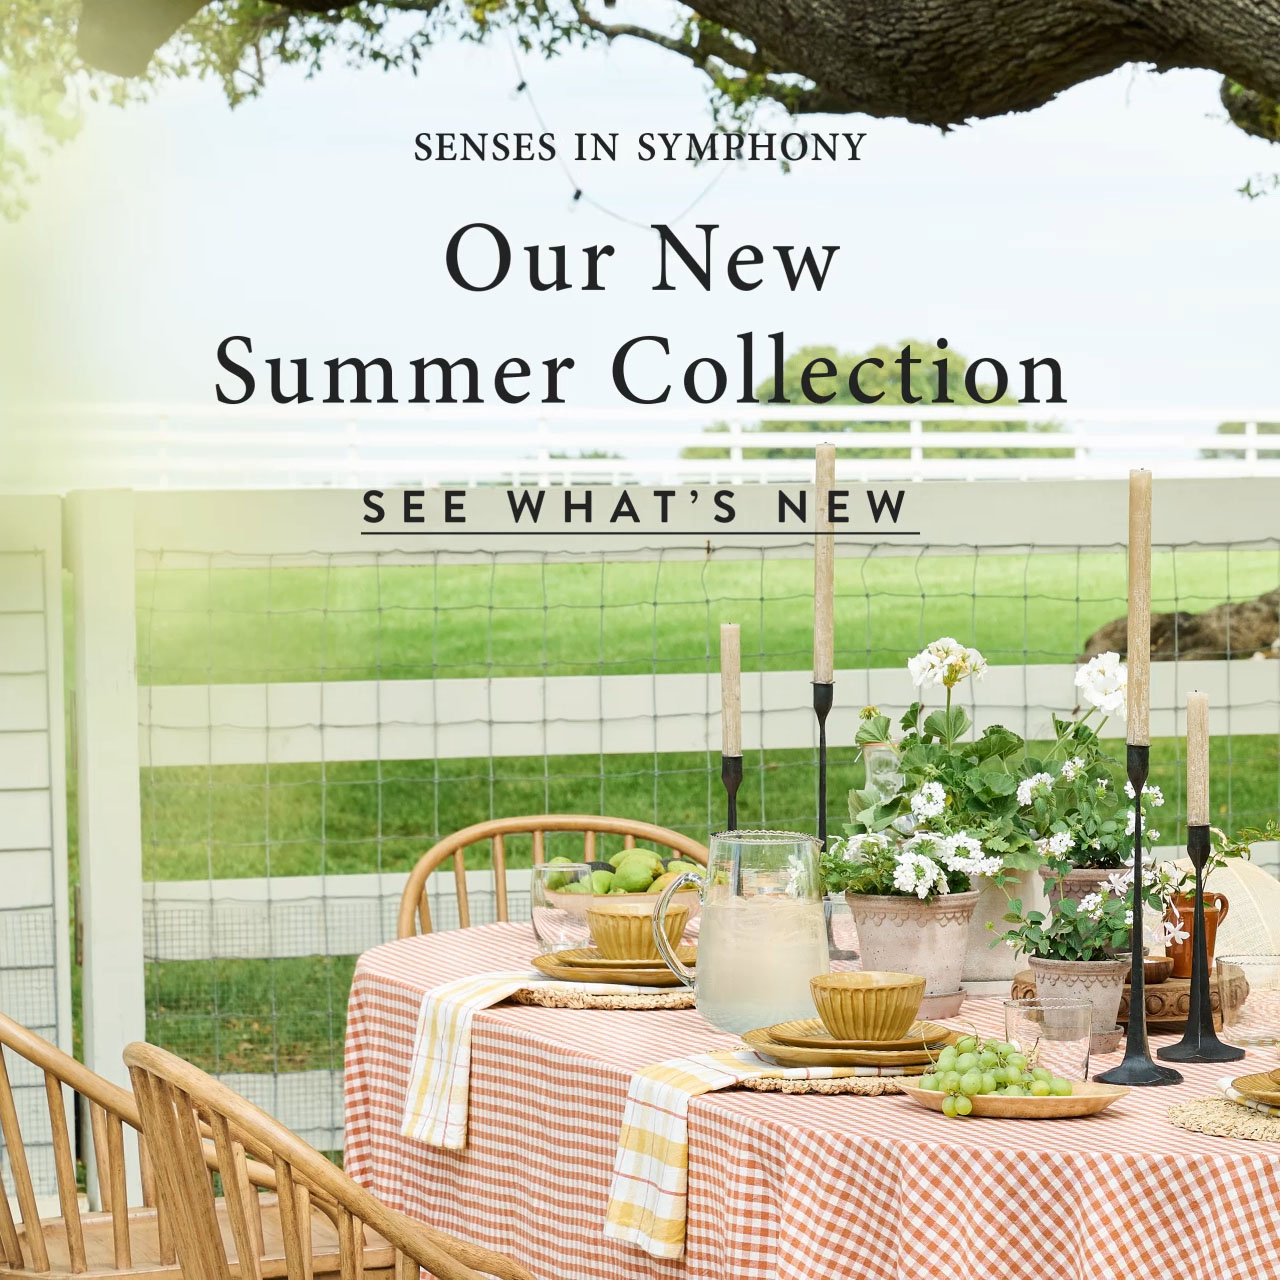 Senses in Symphony. Our new summer collection. See what's new. An outdoor table is set with a terracotta checker patterned tablecloth on the Gaines farm.